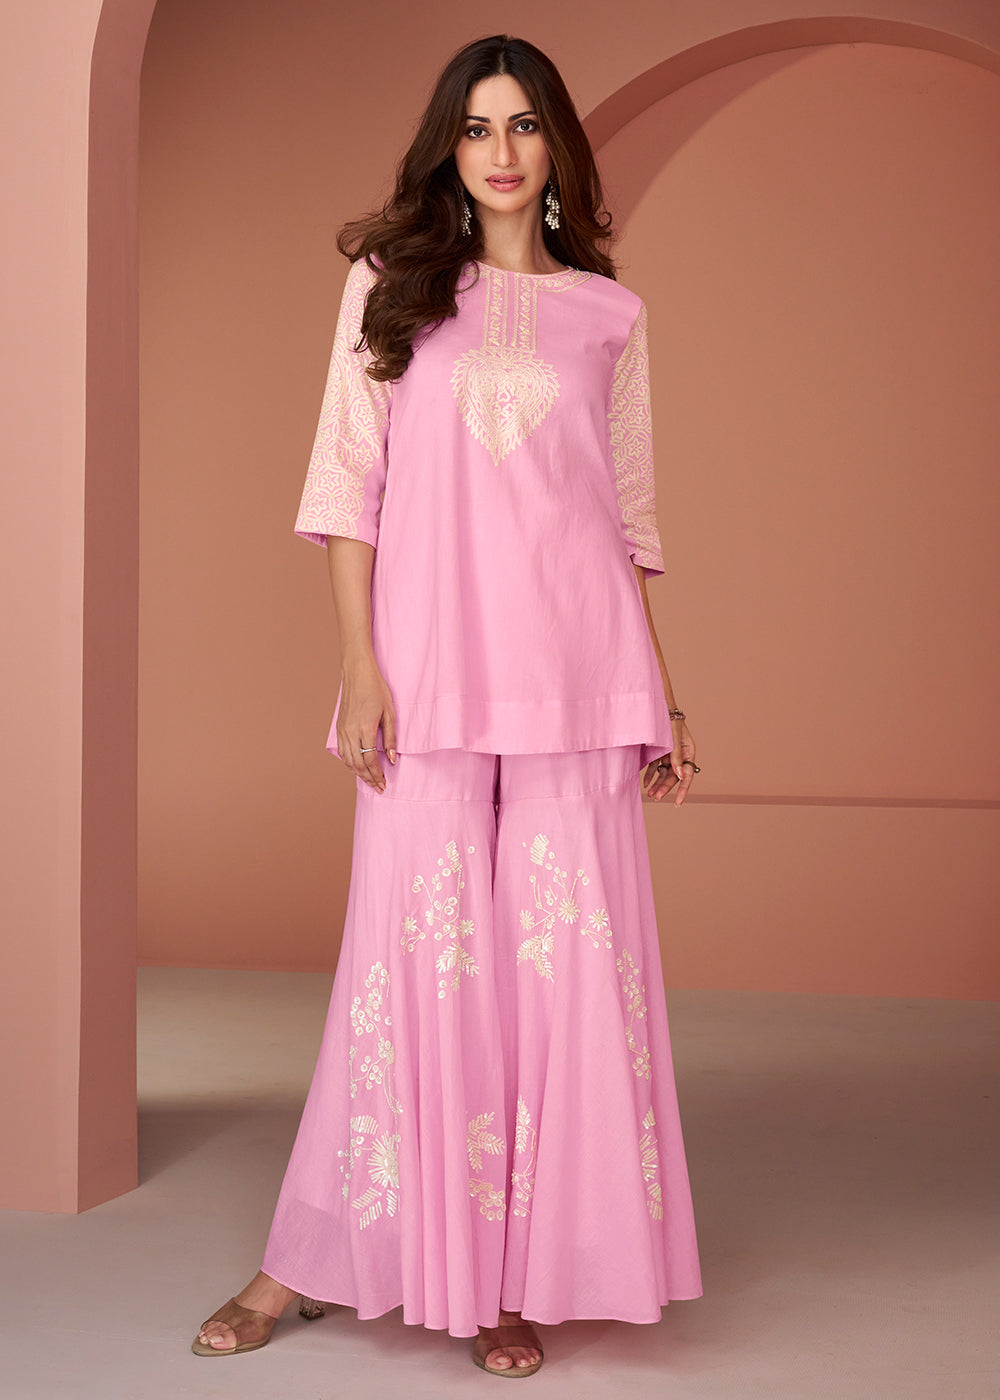 Buy Now Pink Cotton Silk Party Wear Co-Ords Indo-Western Suit Online in USA, UK, Canada, Germany, Australia & Worldwide at Empress Clothing.